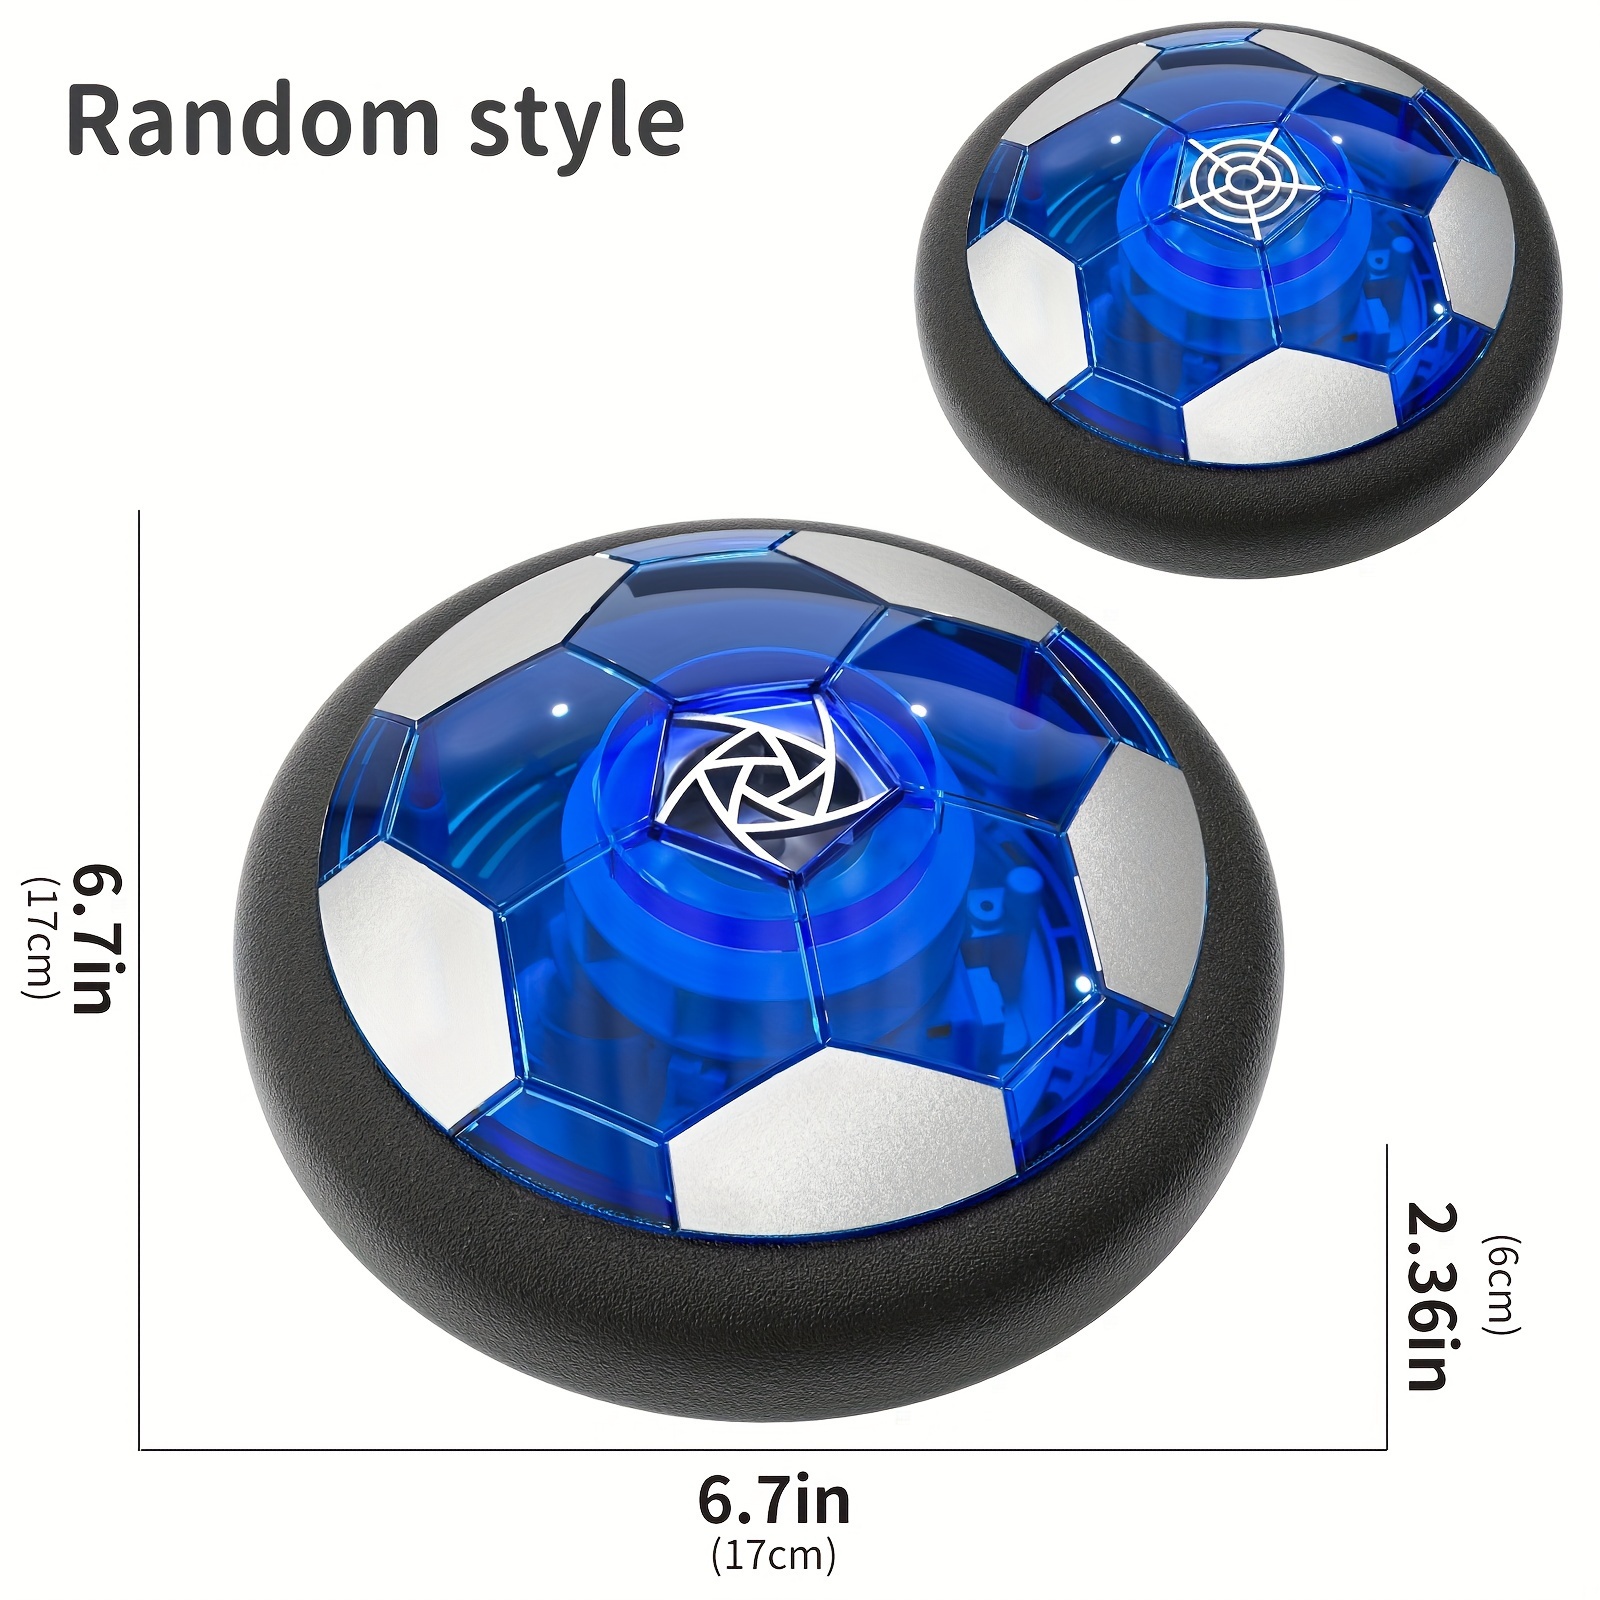 OMOTIYA LED Light Up Soccer Ball - Glow in The Dark Soccer Balls Size 5 -  Sports Gear Soccer Gifts for Boys & Girls 8-12+ Year Old - Kids, Teens